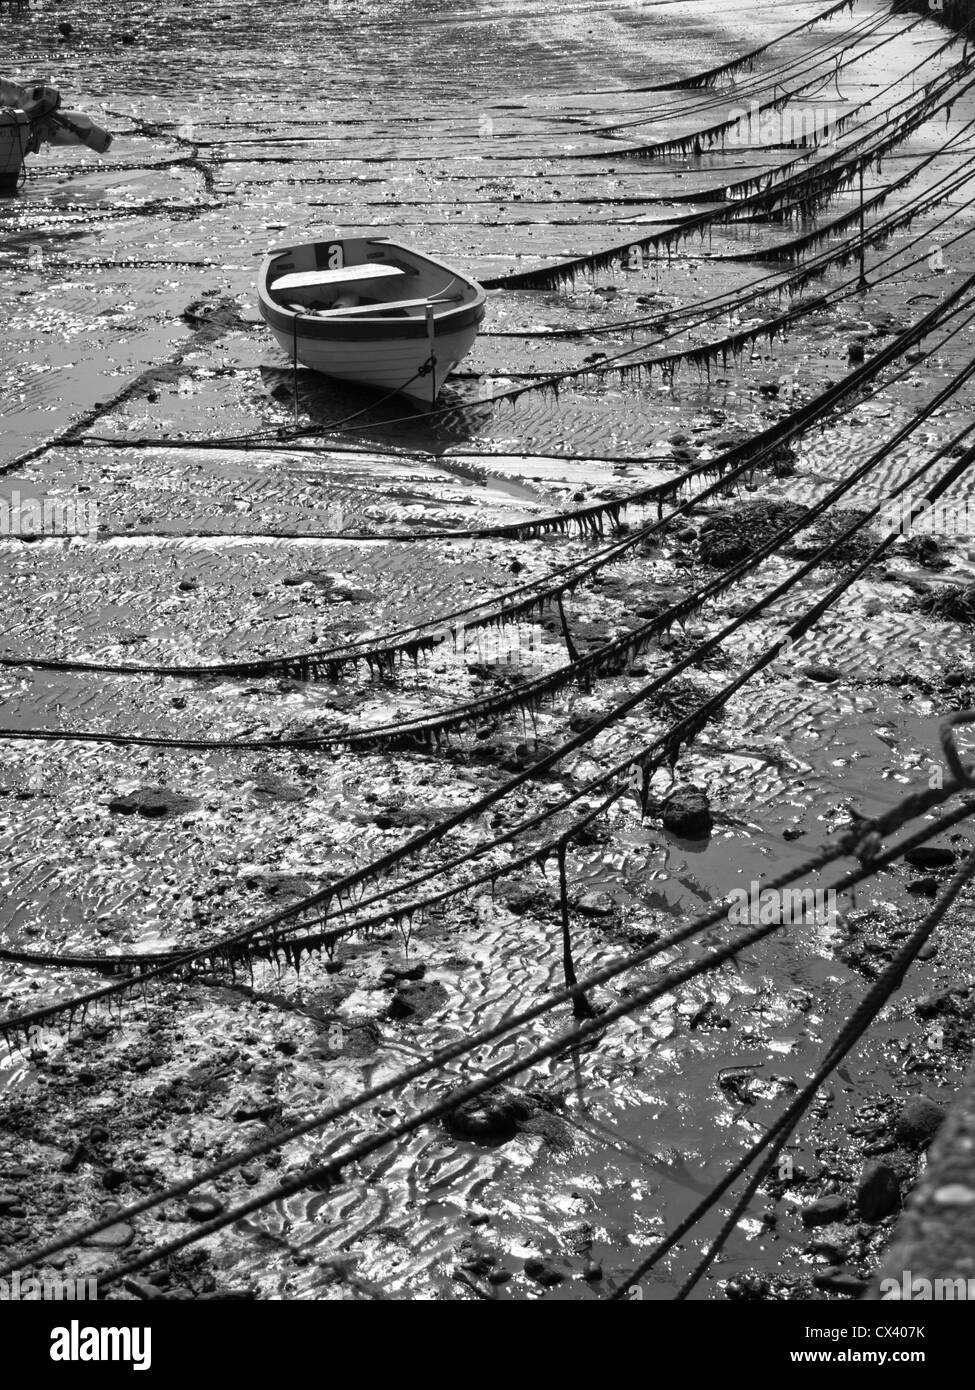 Black and white image of small boat at low tide in Lyme Regis Harbour, UK. Stock Photo